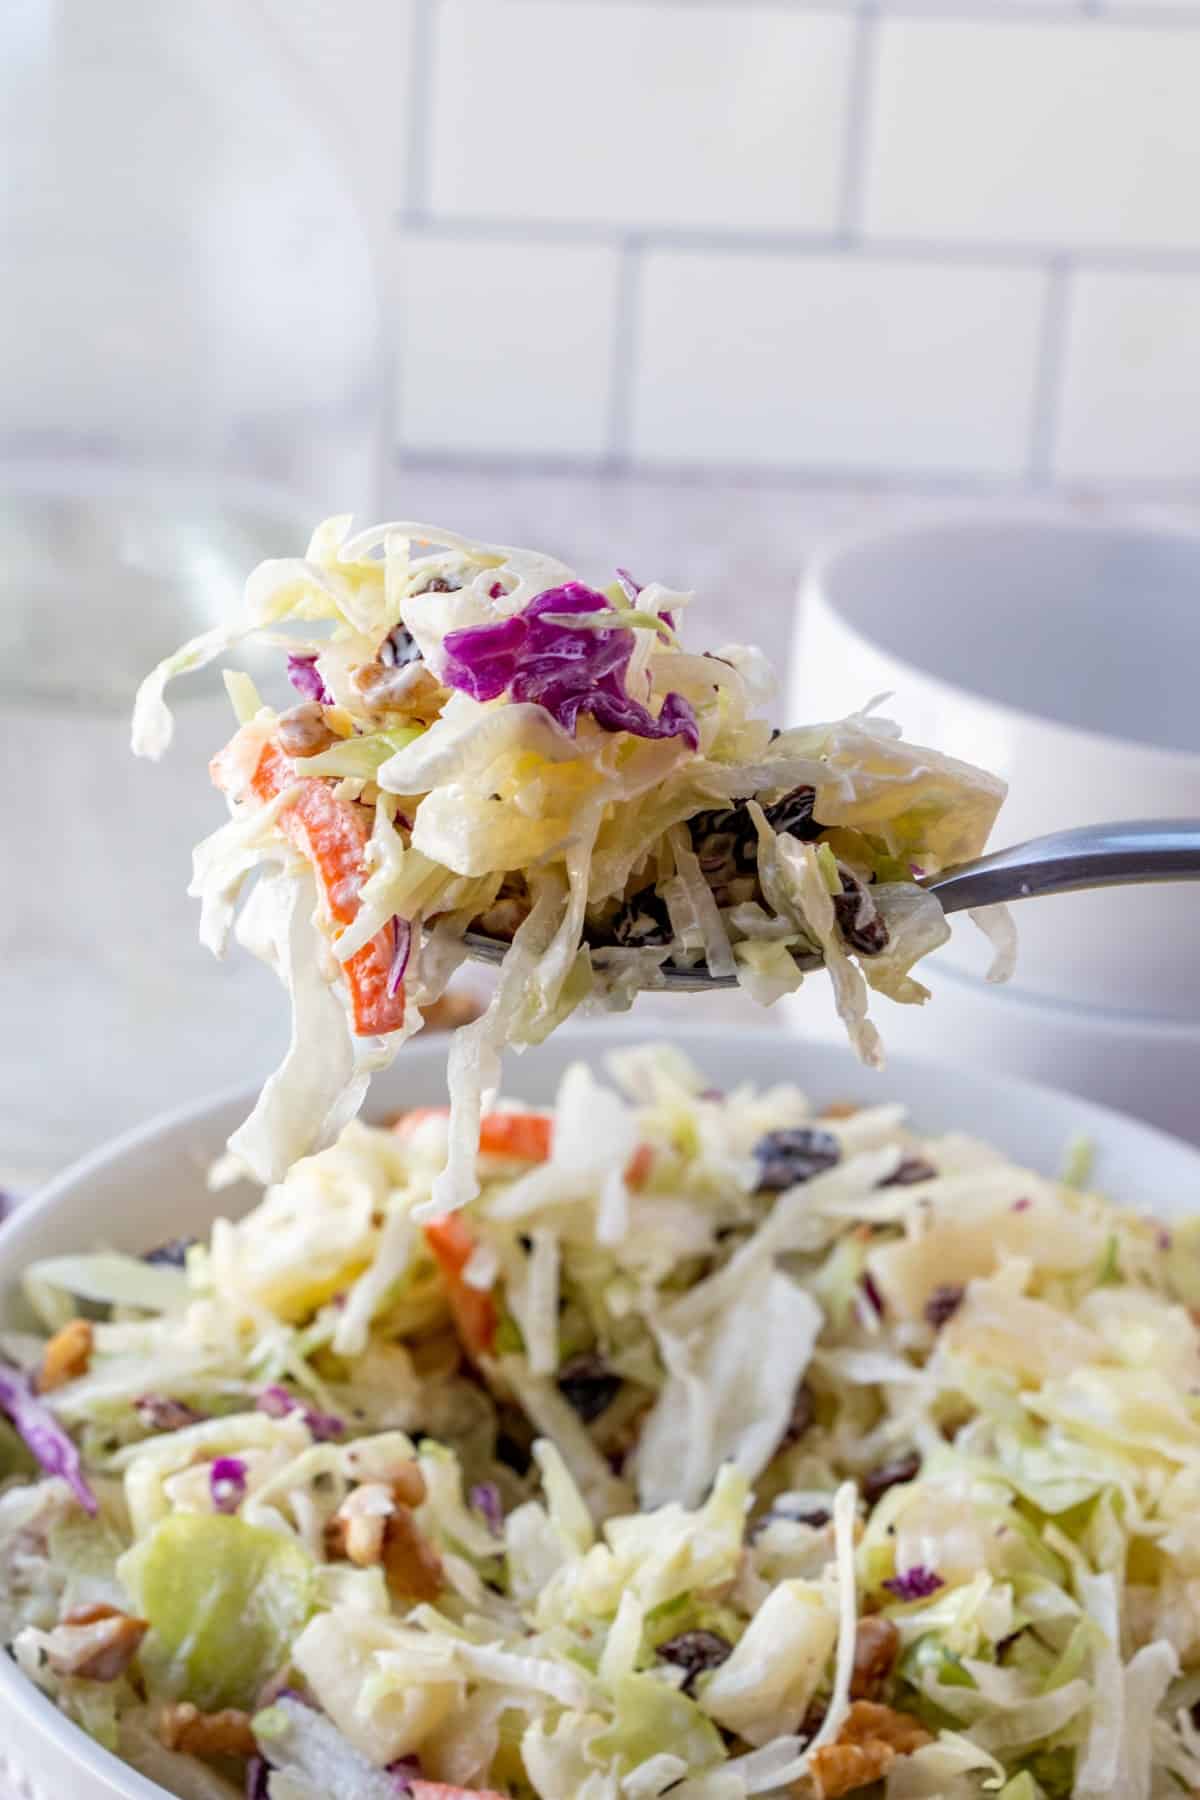 Large spoonful of coleslaw